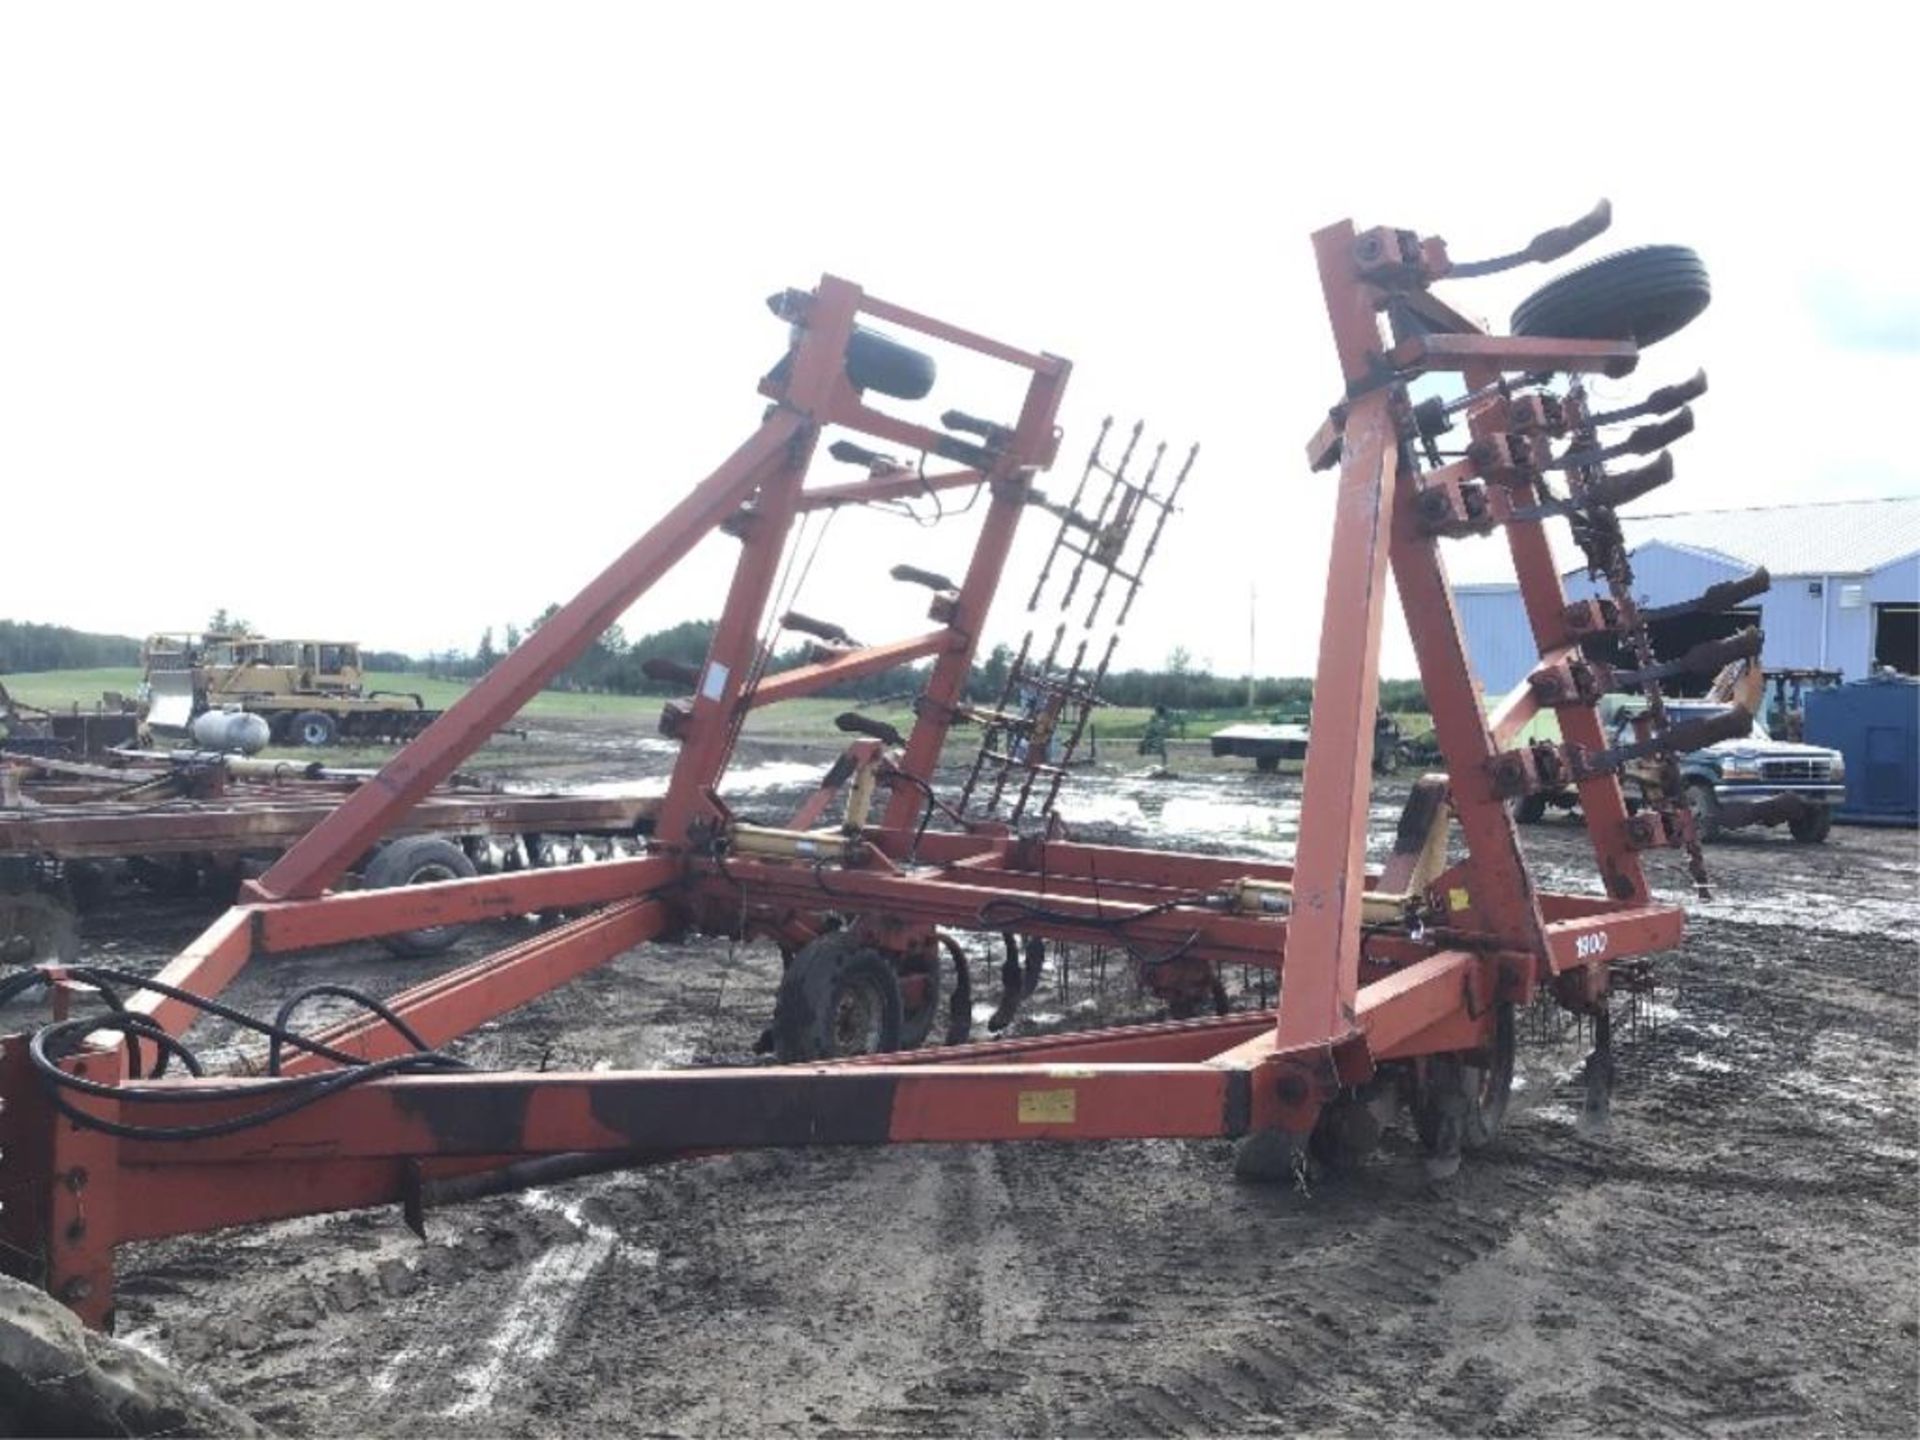 29Ft Case 1900 Deep Tillage Cultivator 12in spacing, Mounted Harrows